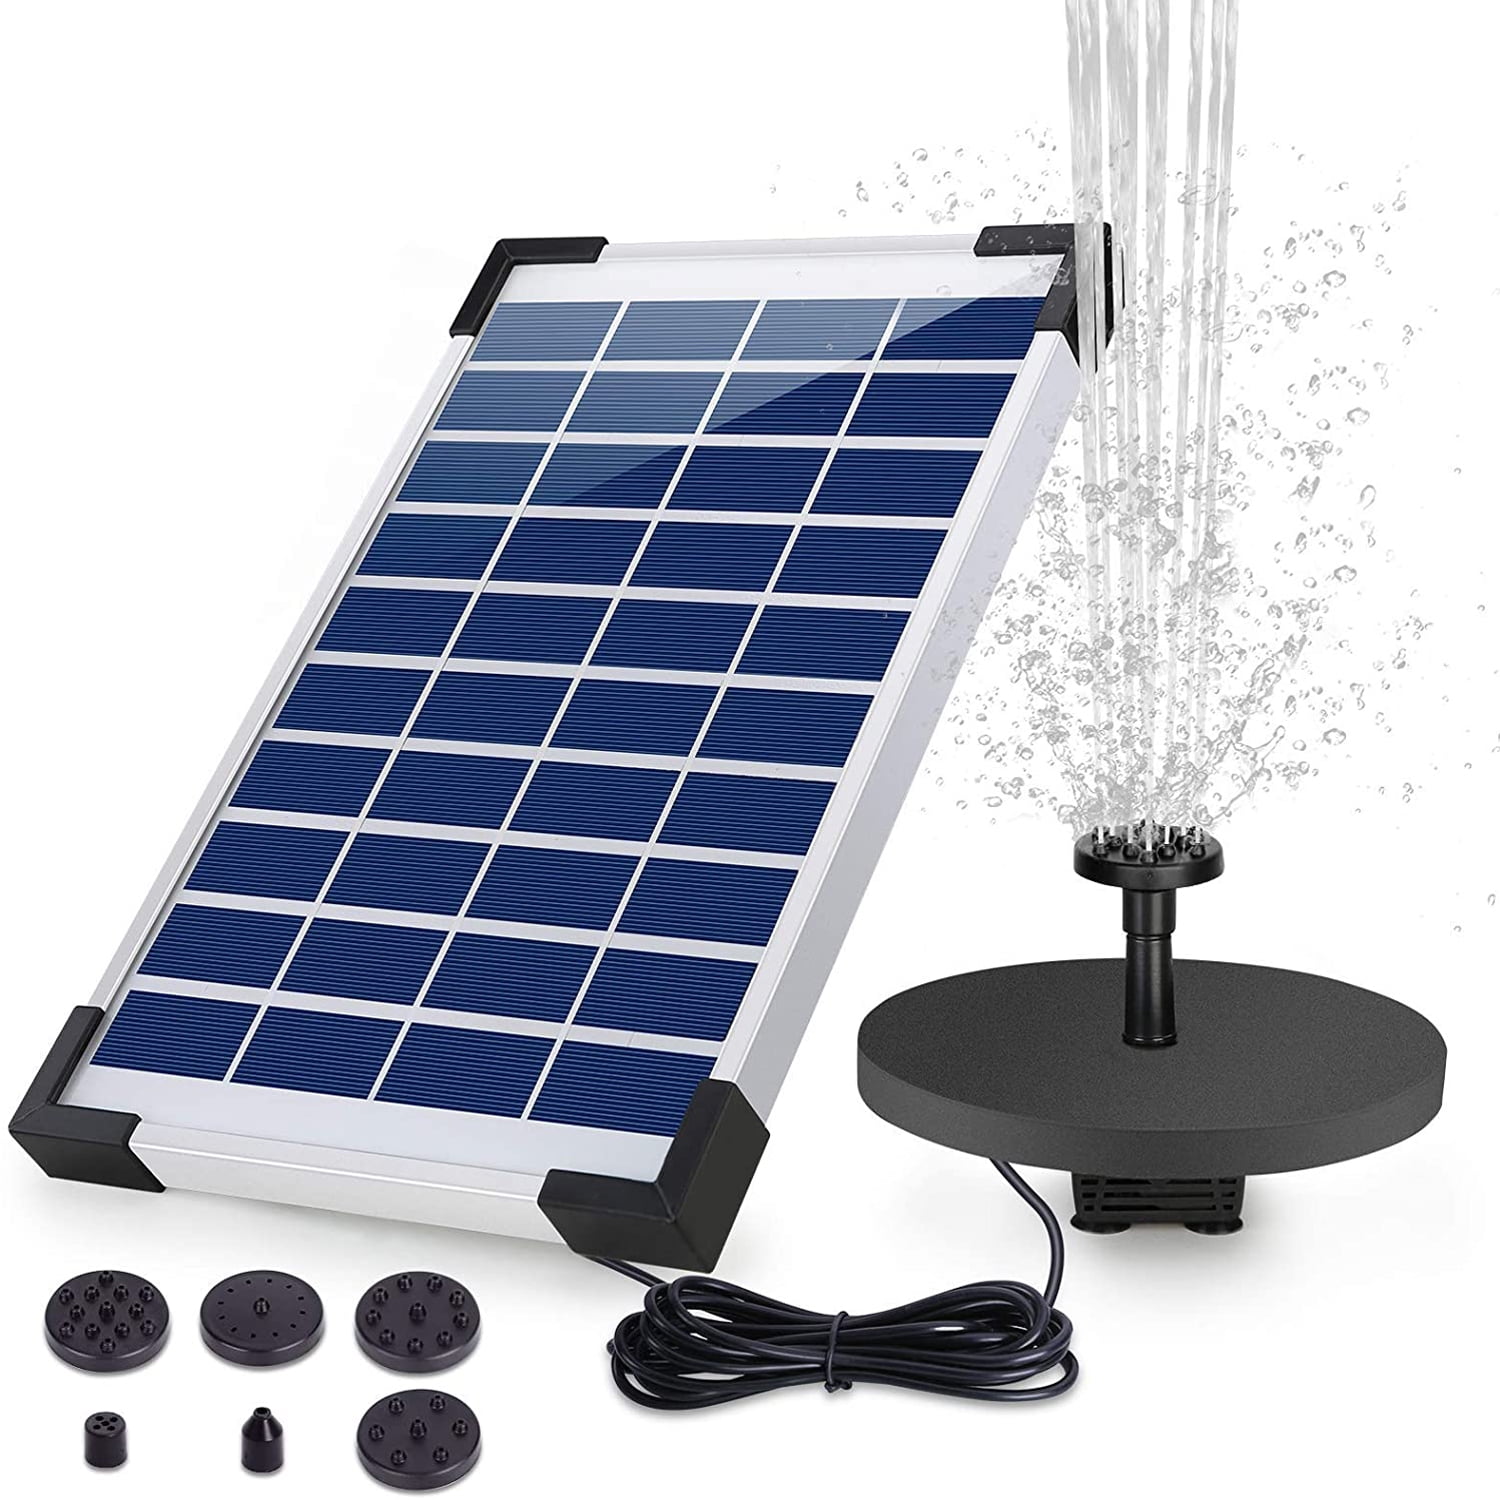 3.5W Solar Powered Water Pump Solar Panel with 7 Nozzles Kit Water Pump for Pond Garden Decoration BirdBath Fountain Water Cycling Solar Fountain Pump 